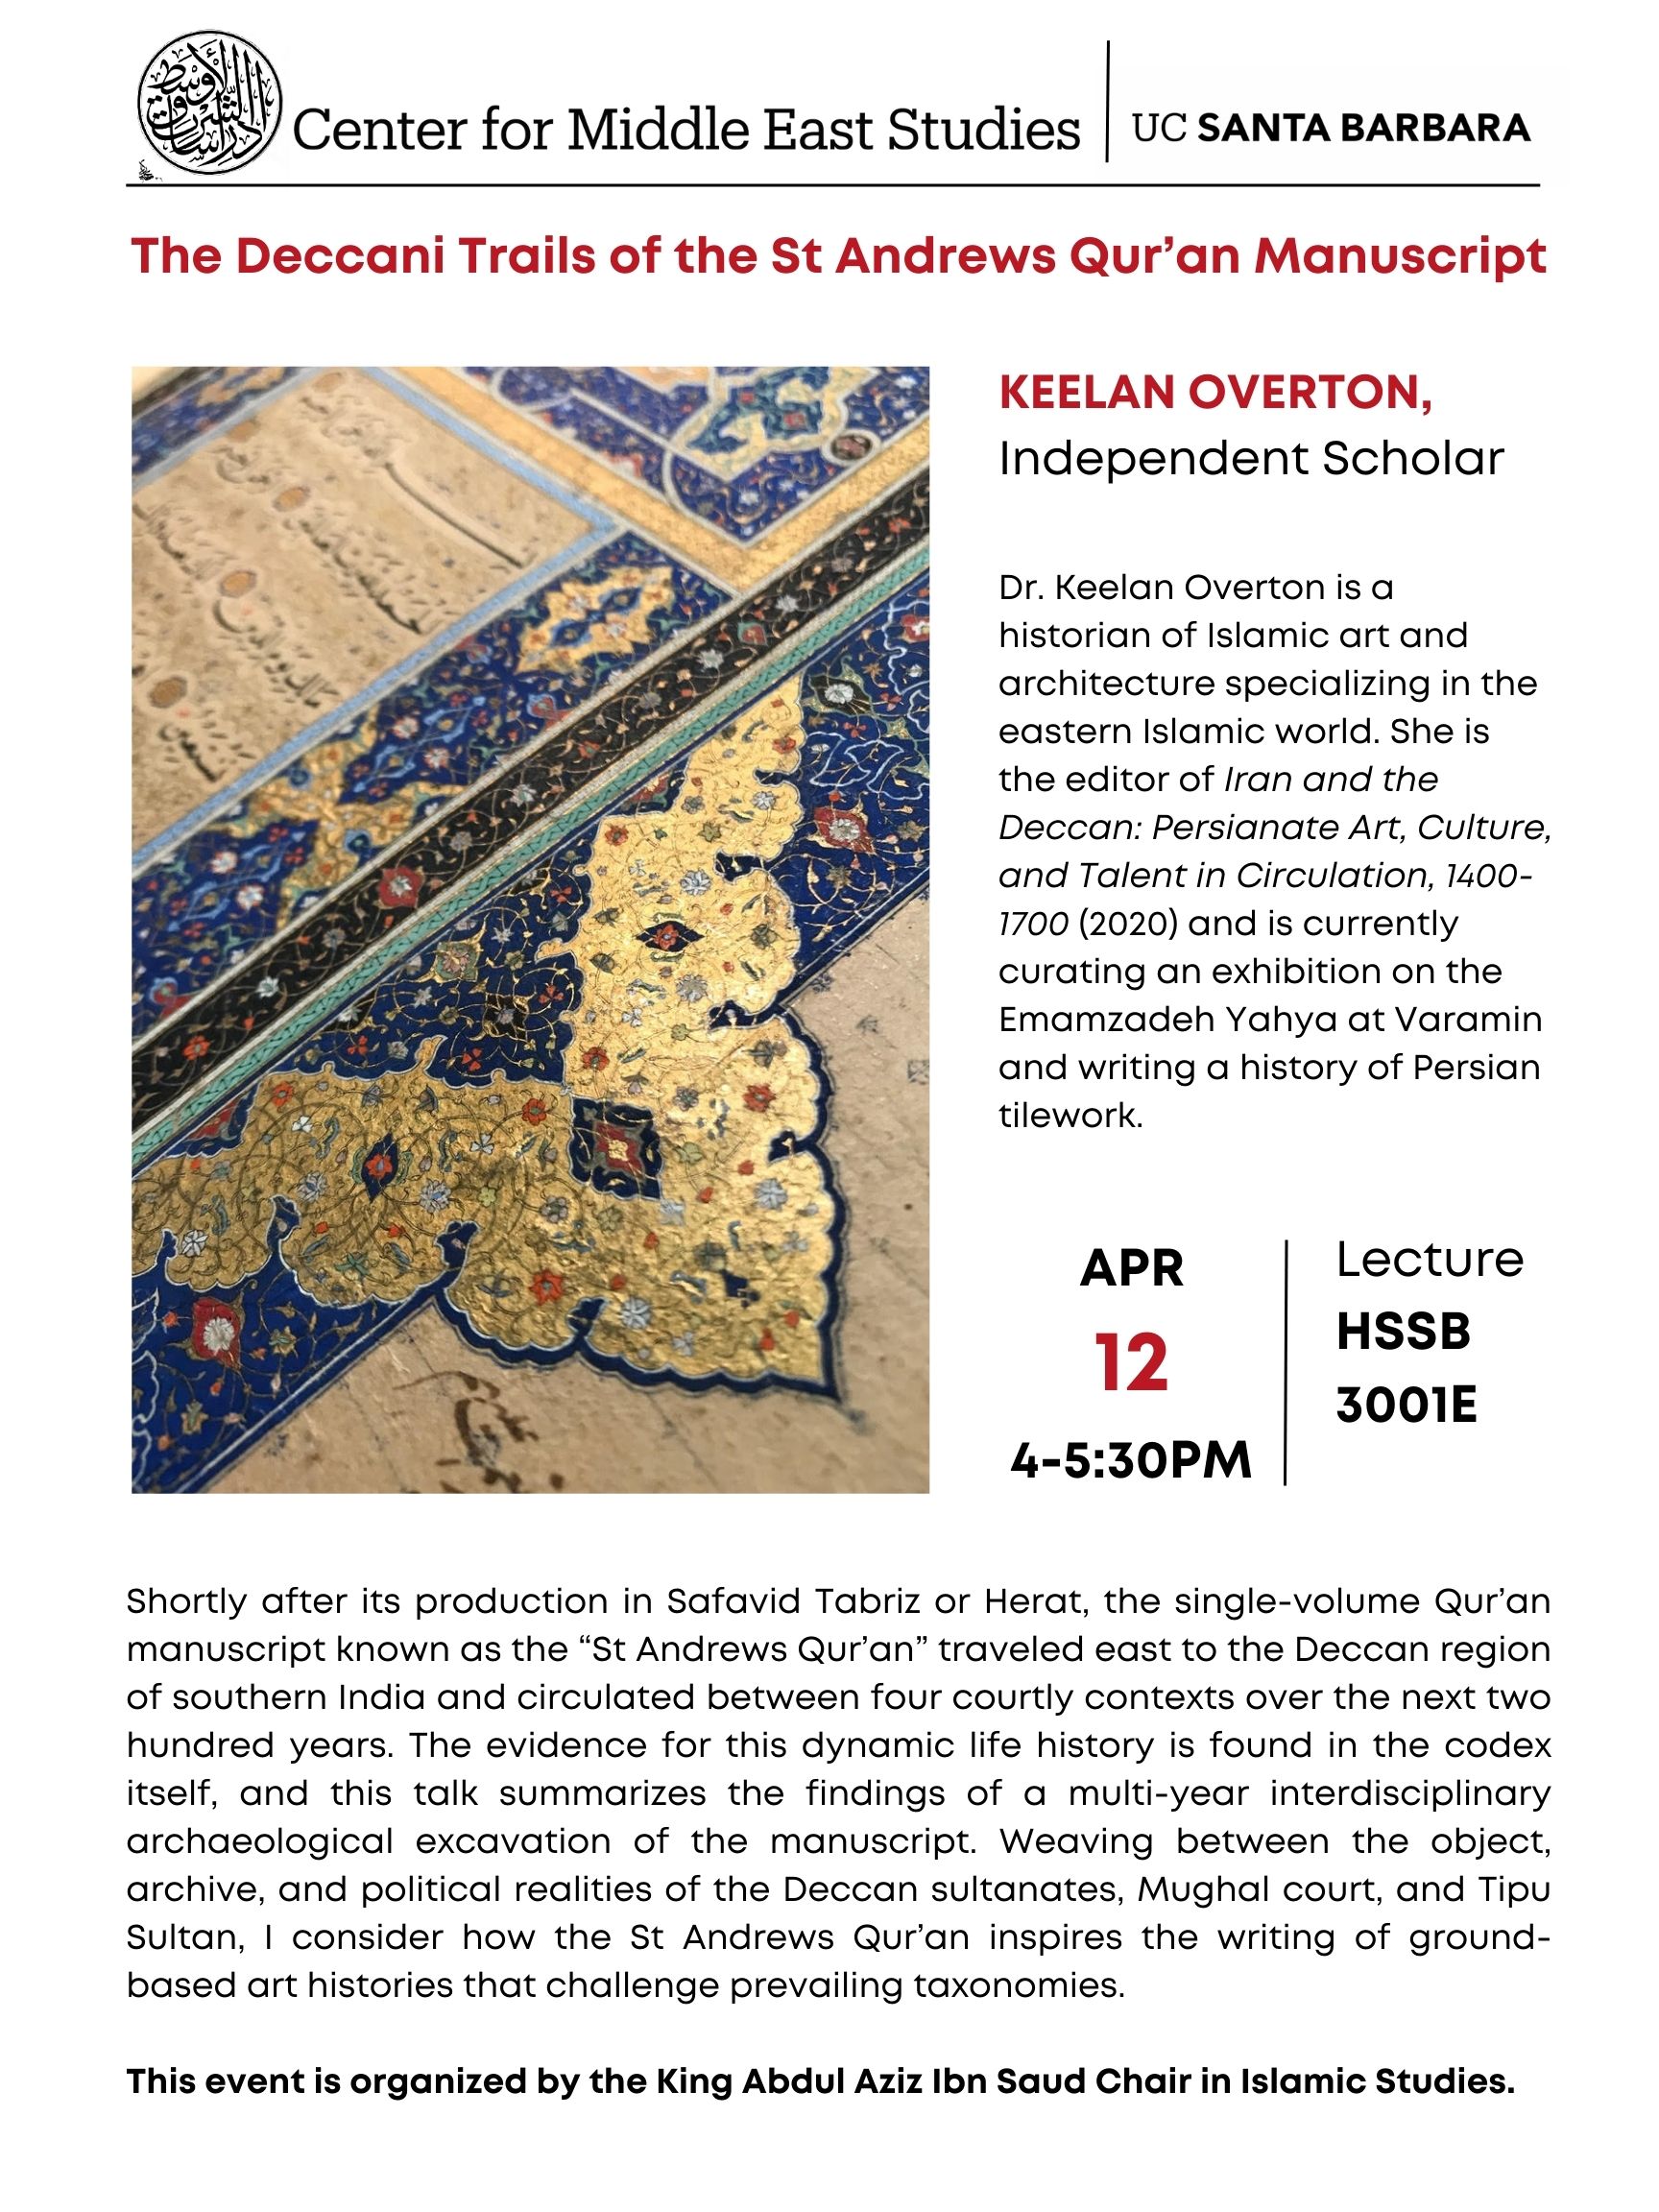 Flyer for "The Deccani Trails of the St Andrews Qur’an Manuscript" by Keelan Overton on April 12 from 4-5:30PM in HSSB 3001E